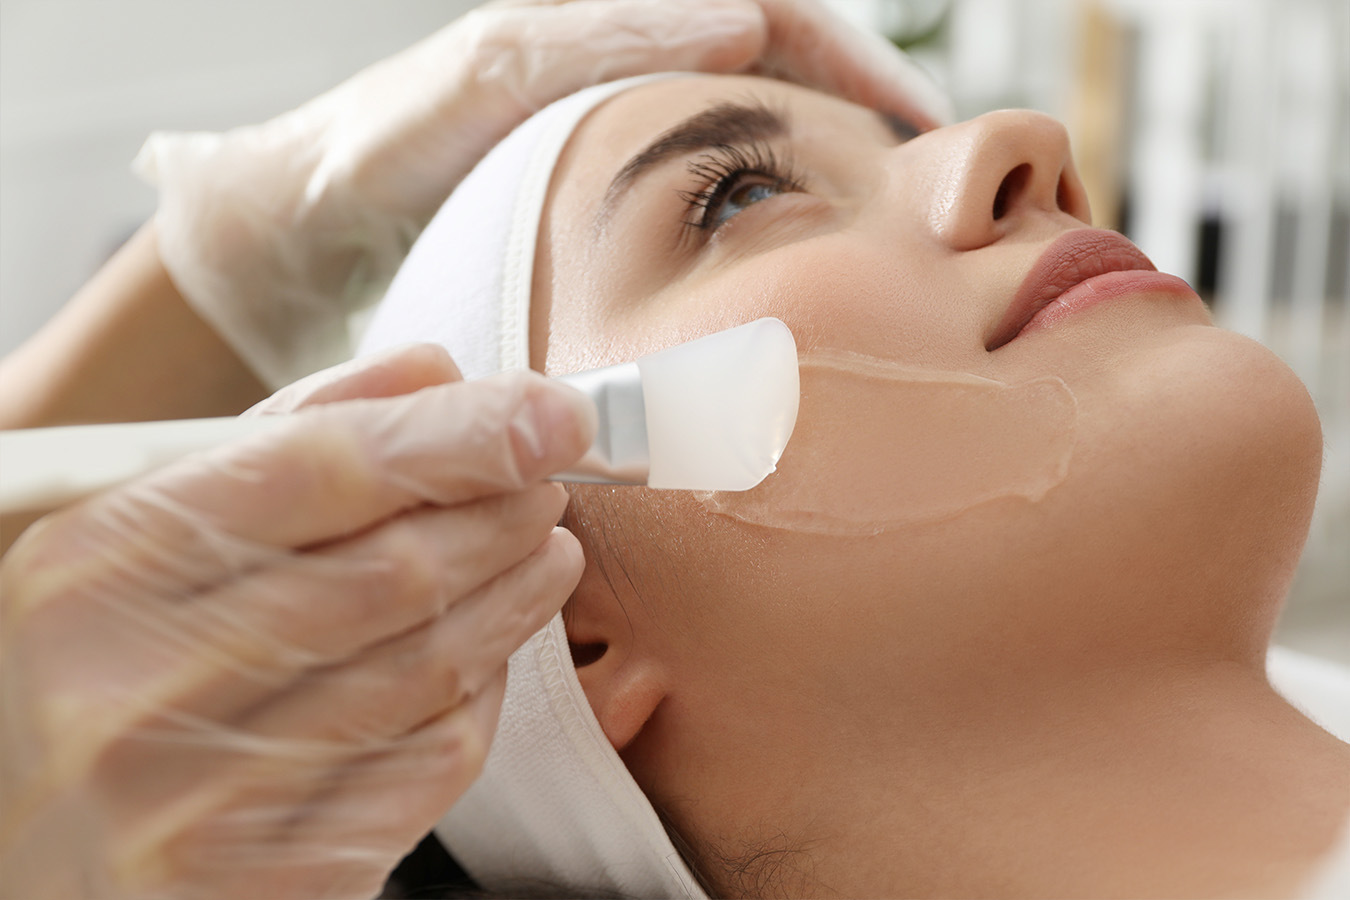 Achieve a Youthful Look with Wrinkle Reduction/Relaxation in NYC